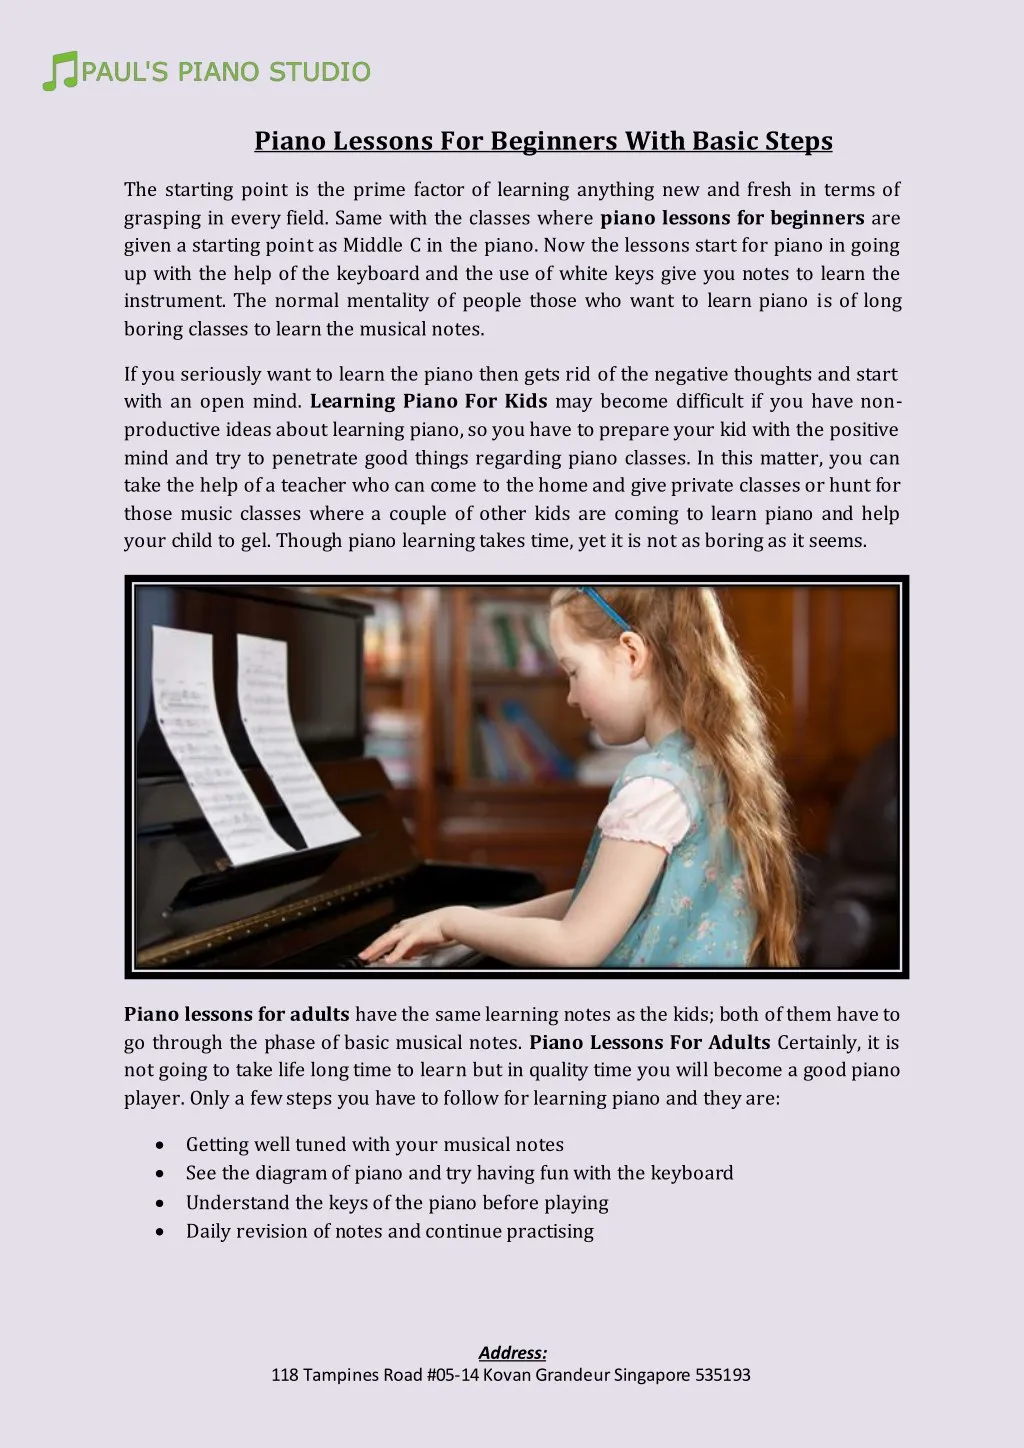 piano lessons for beginners with basic steps